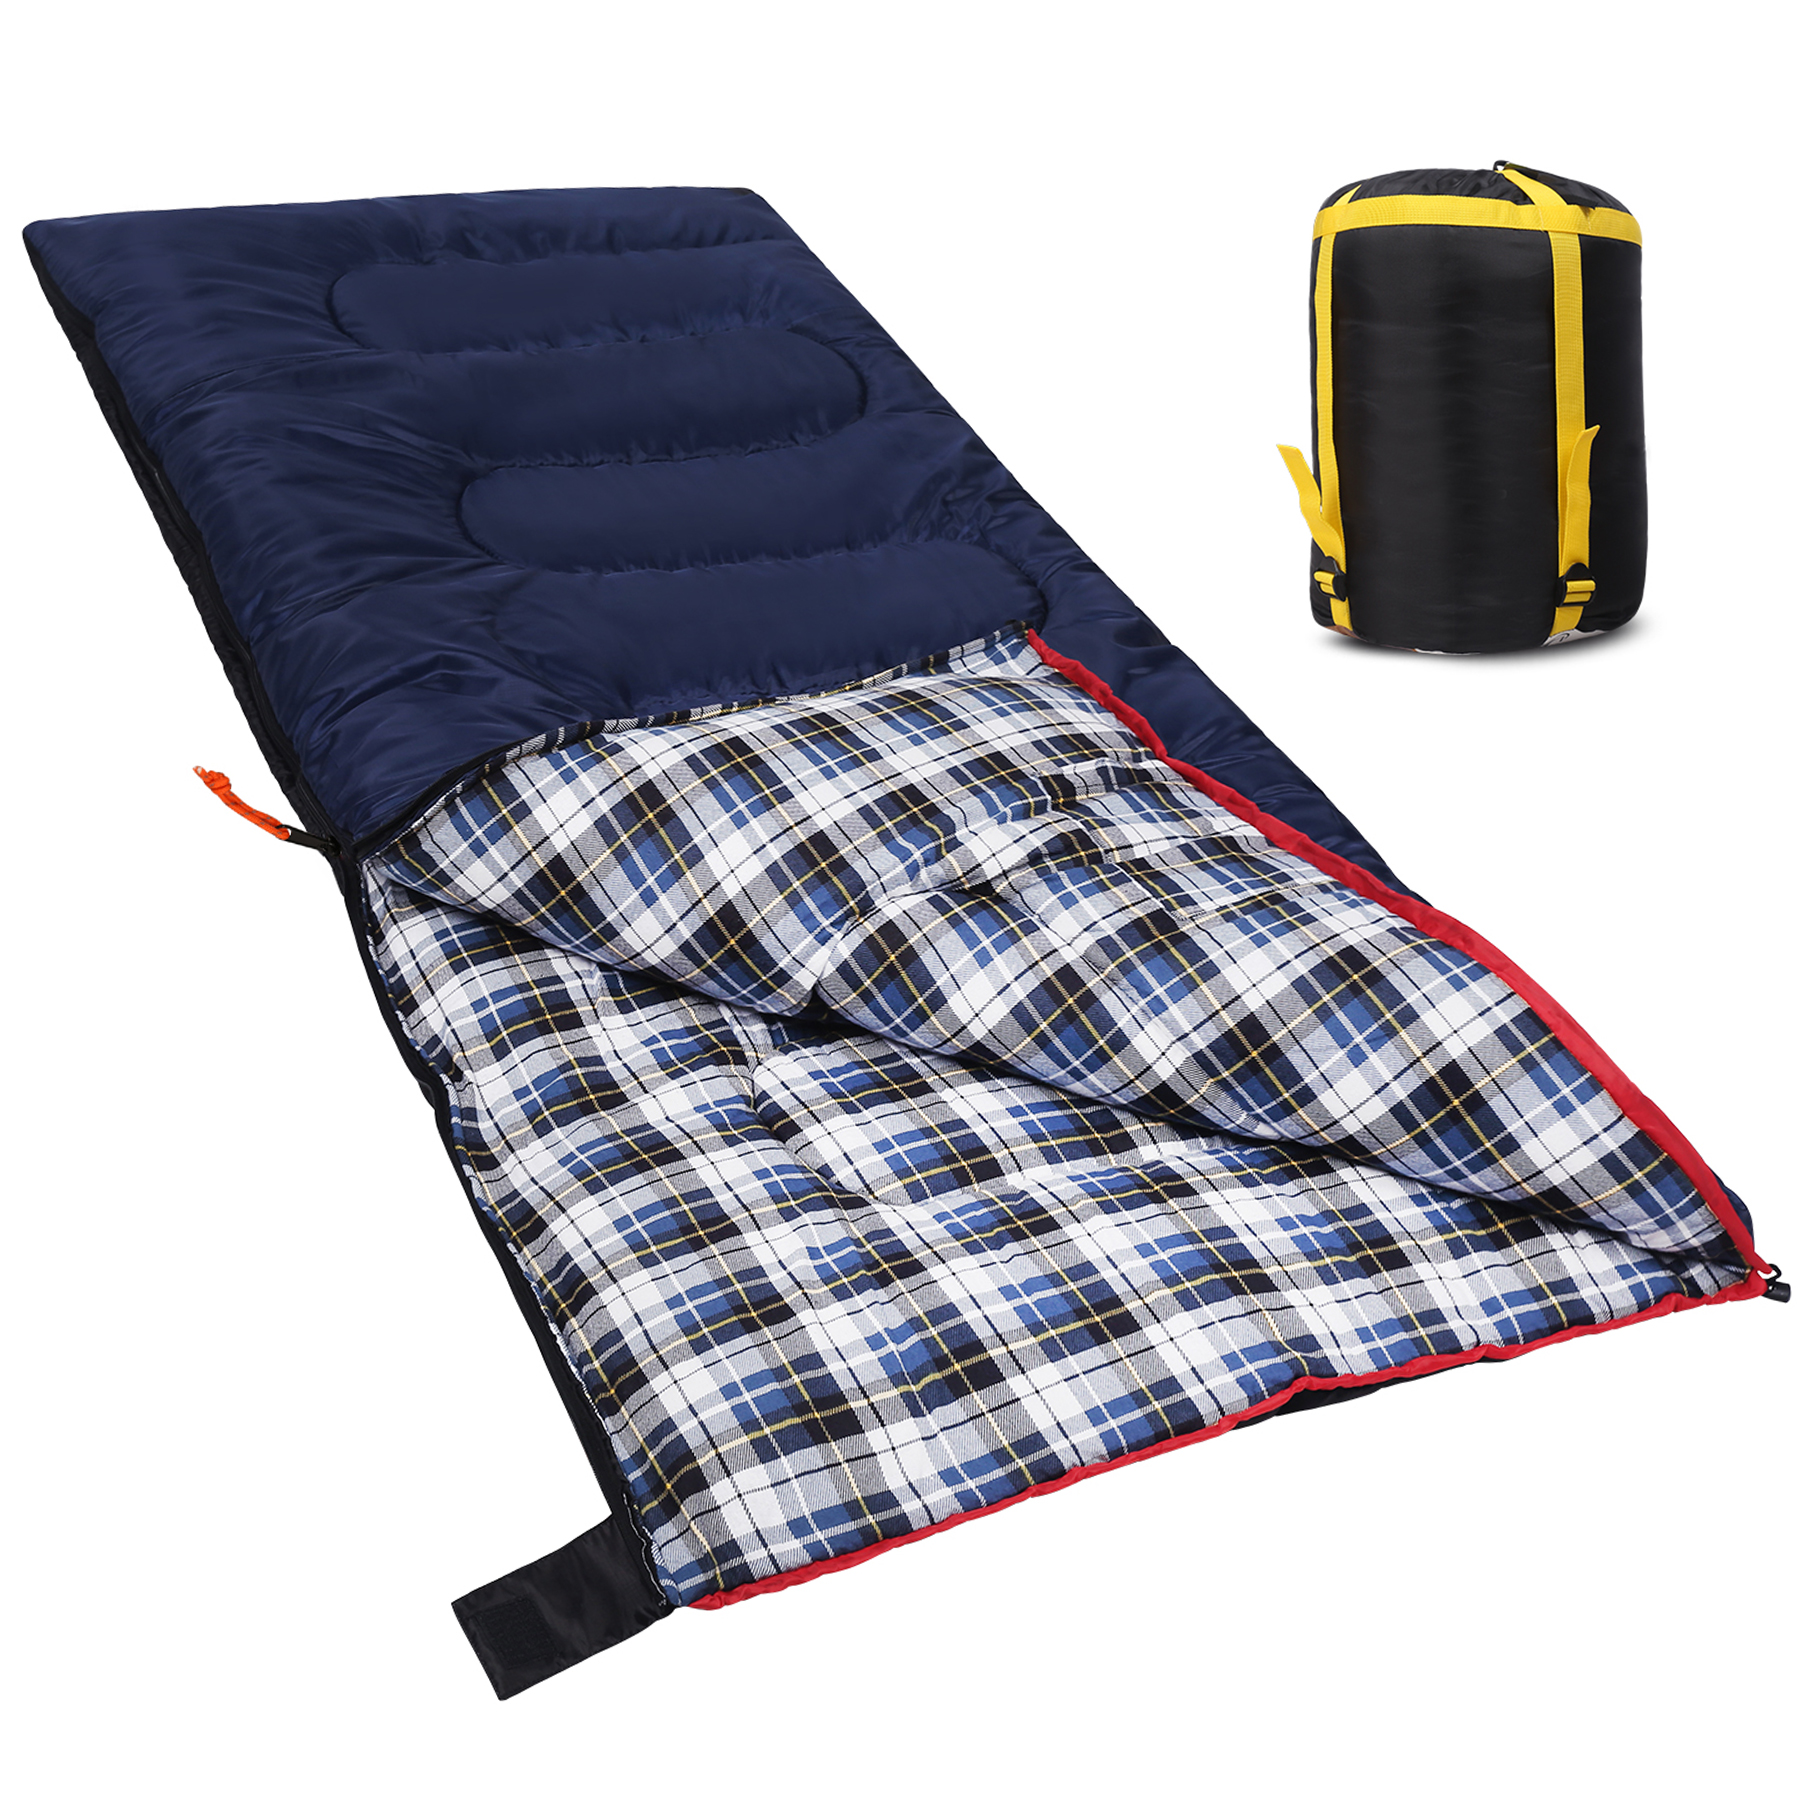 REDCAMP Cotton Flannel Sleeping Bags for Adults Warm/Cold Weather, 4 Season Waterproof Portable Sleep Bag for Camping w/ Compression Sack, Blue - image 1 of 8